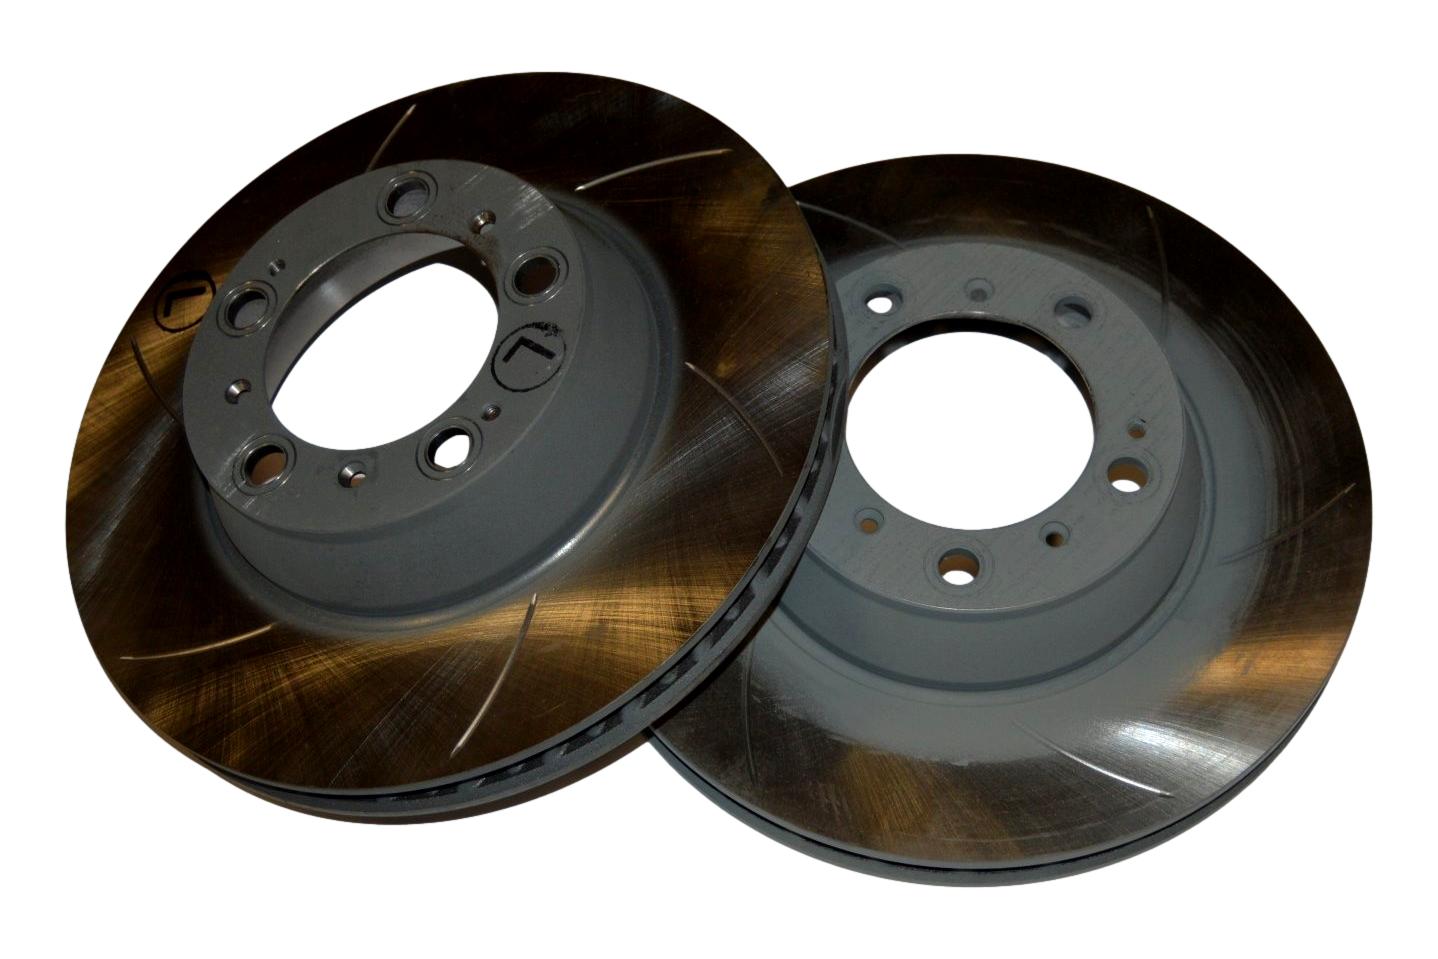 Slotted Brake Rotors - High-quality German rotor blanks with deep slots for improved durability and performance. Zinc coated. Sold as a pair. Replaces part numbers 996.352.405.00 and 996.352.406.00. Size: 330x28mm. Fits the rear of the 996 GT3 Cup.